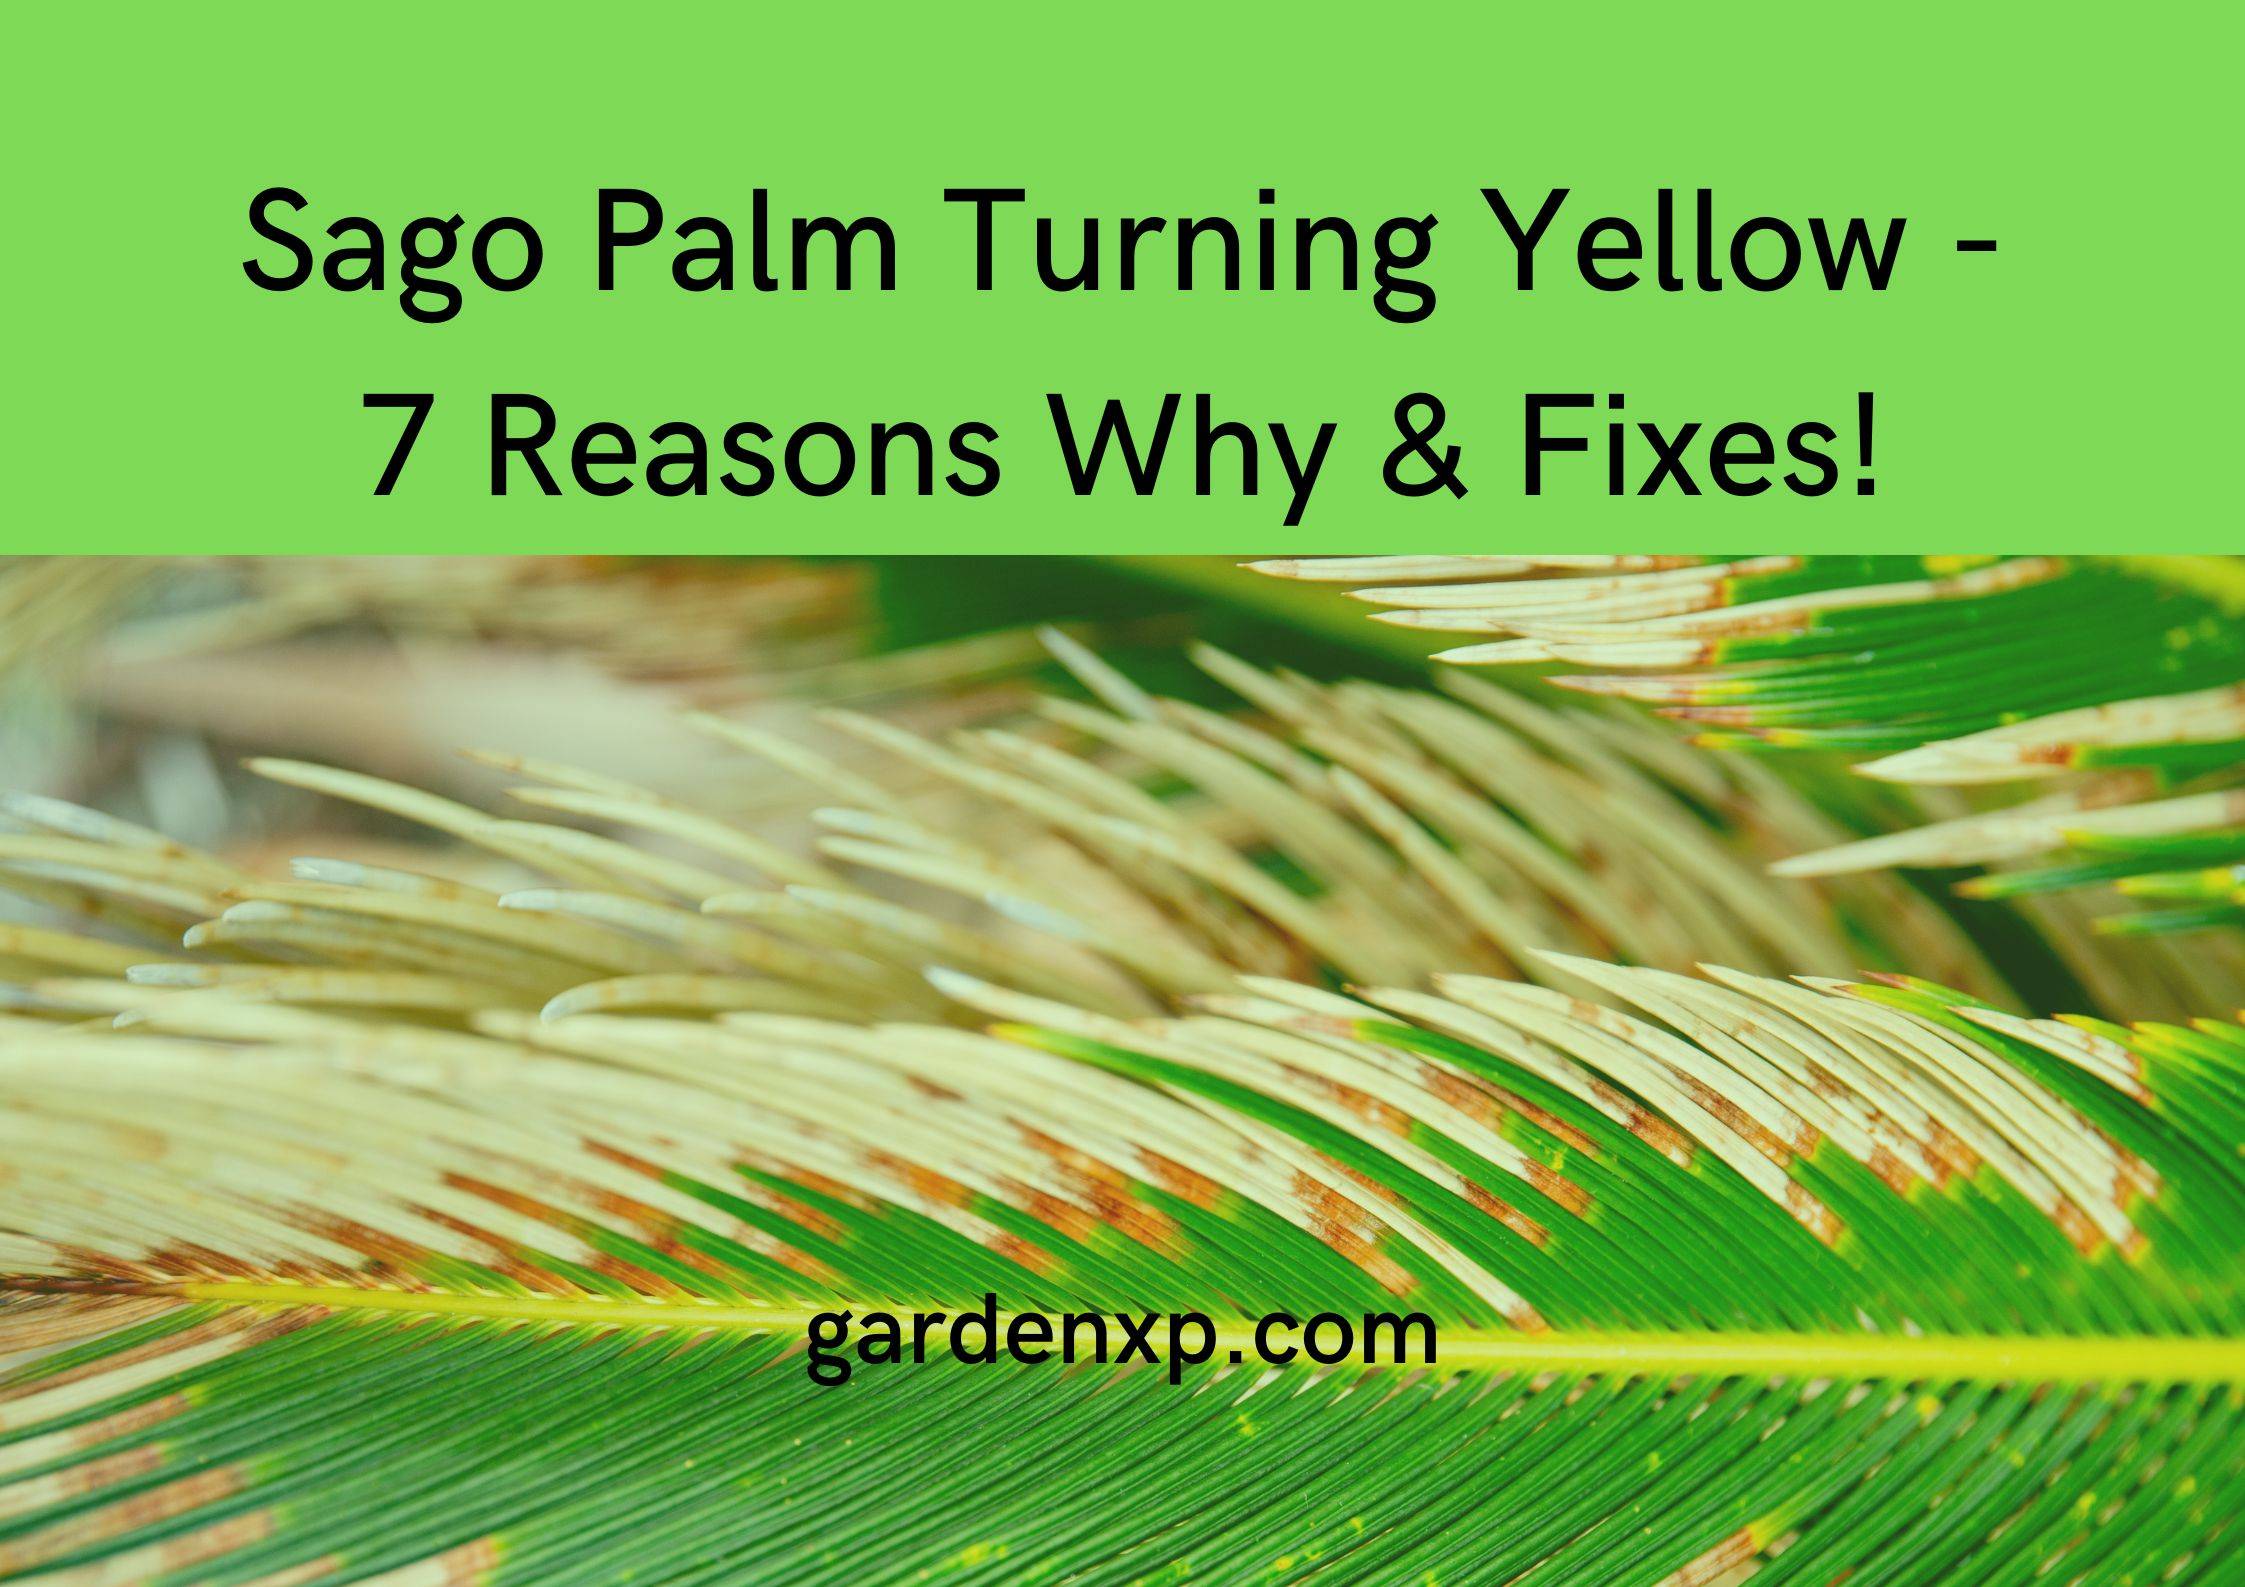 Sago Palm Turning Yellow - 7 Reasons Why & Fixes!